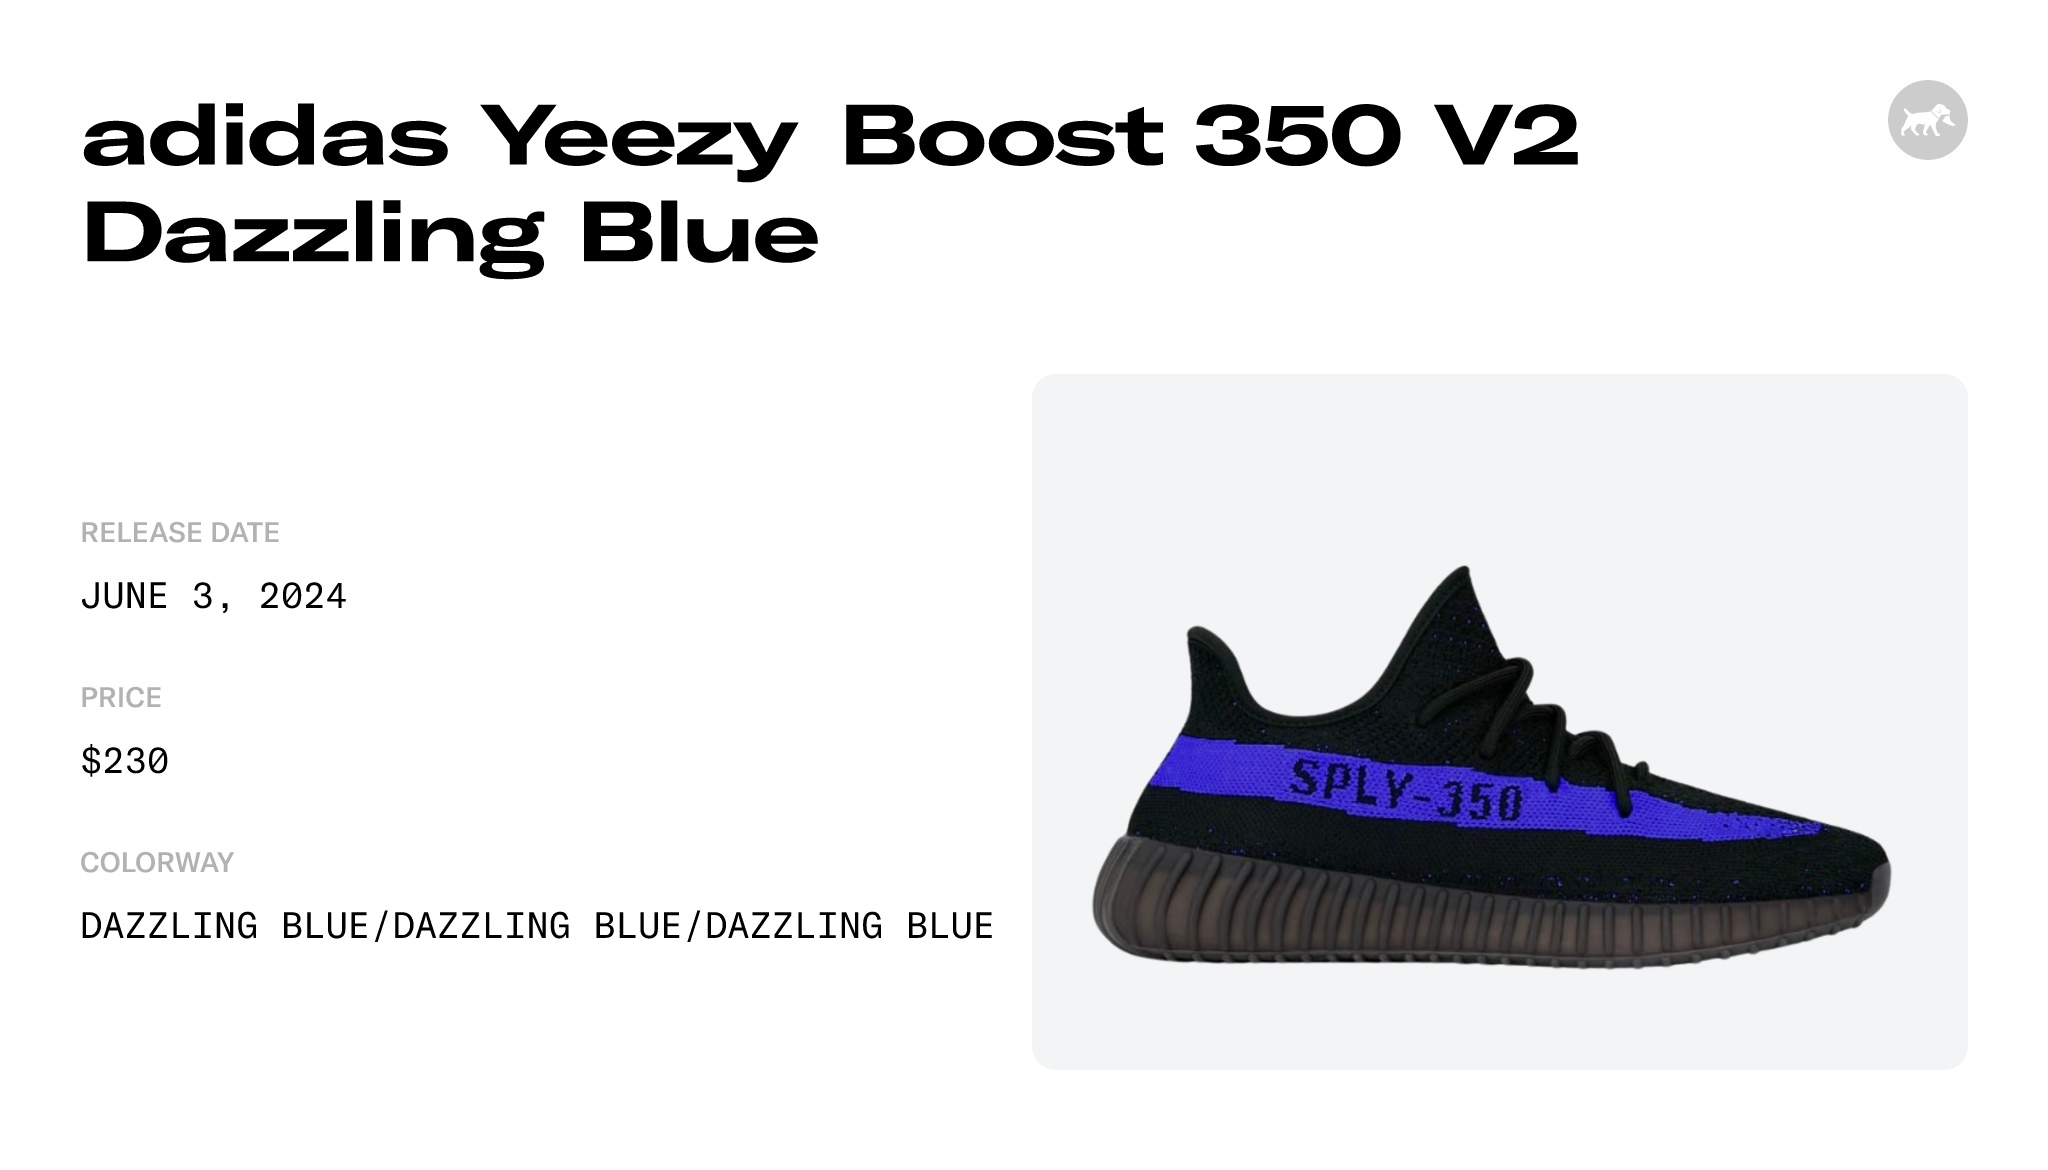 adidas Yeezy Boost 350 V2 Dazzling Blue - GY7164 Raffles and Release Date